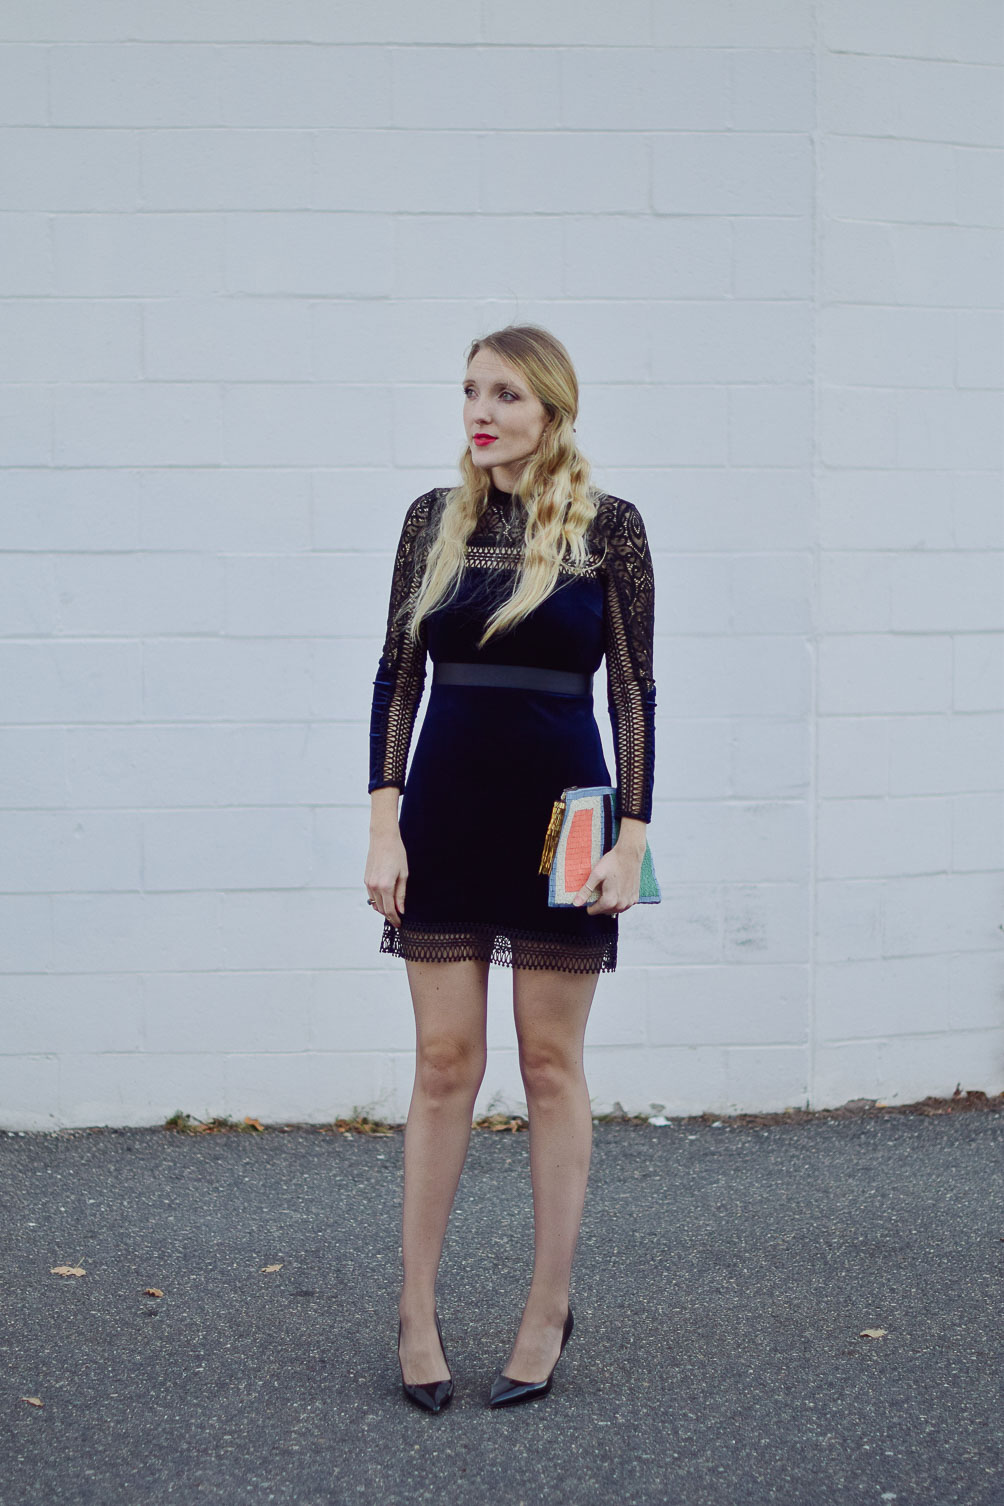 sharing holiday dresses under 150 with blue velvet lace, a beaded clutch, and patent leather heels